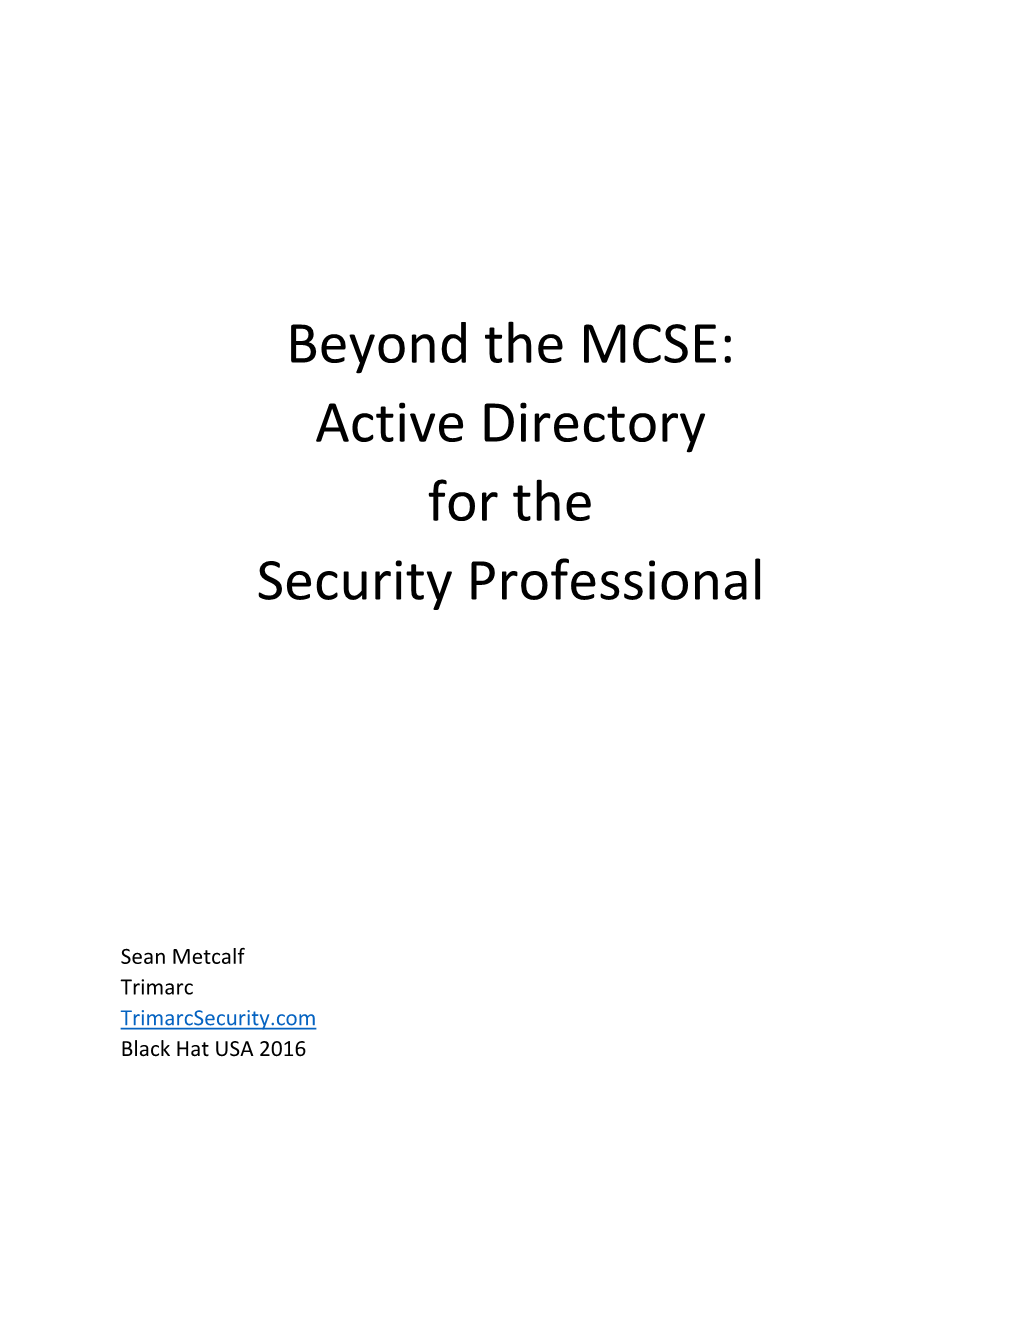 Active Directory for the Security Professional